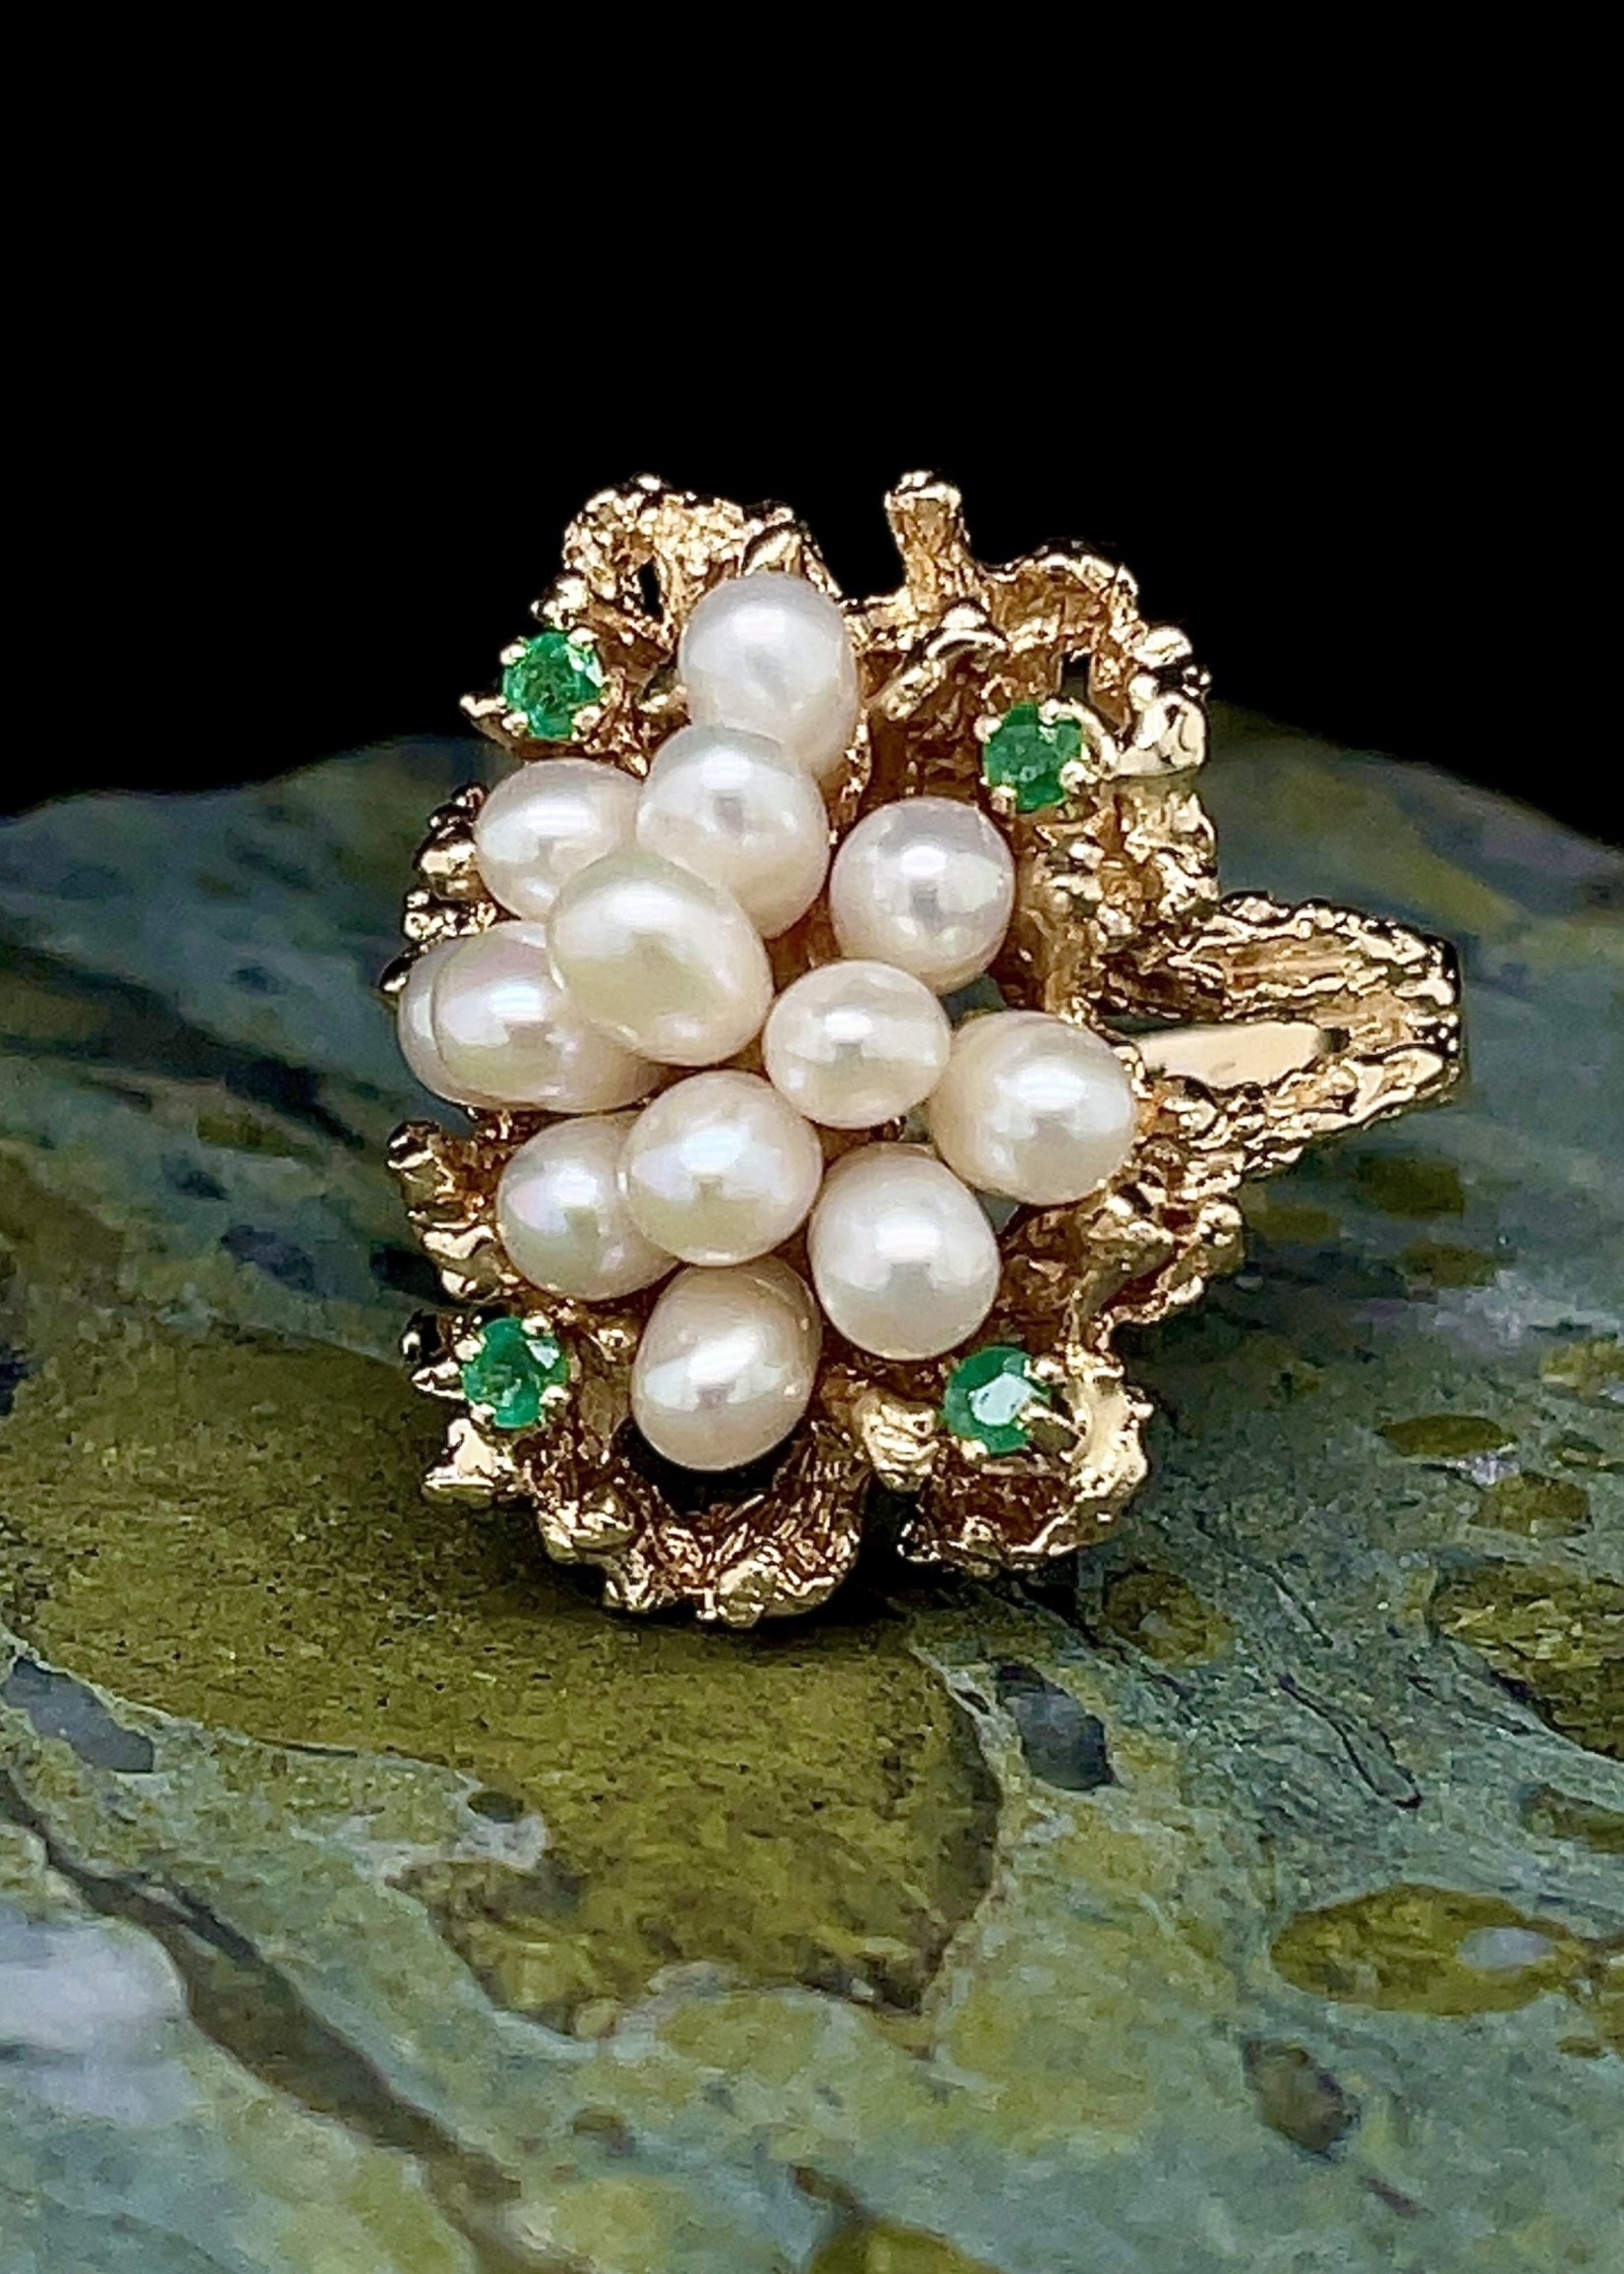 Vintage and Estate Jewelry 14 k free form organic pearl cluster ring w emeralds